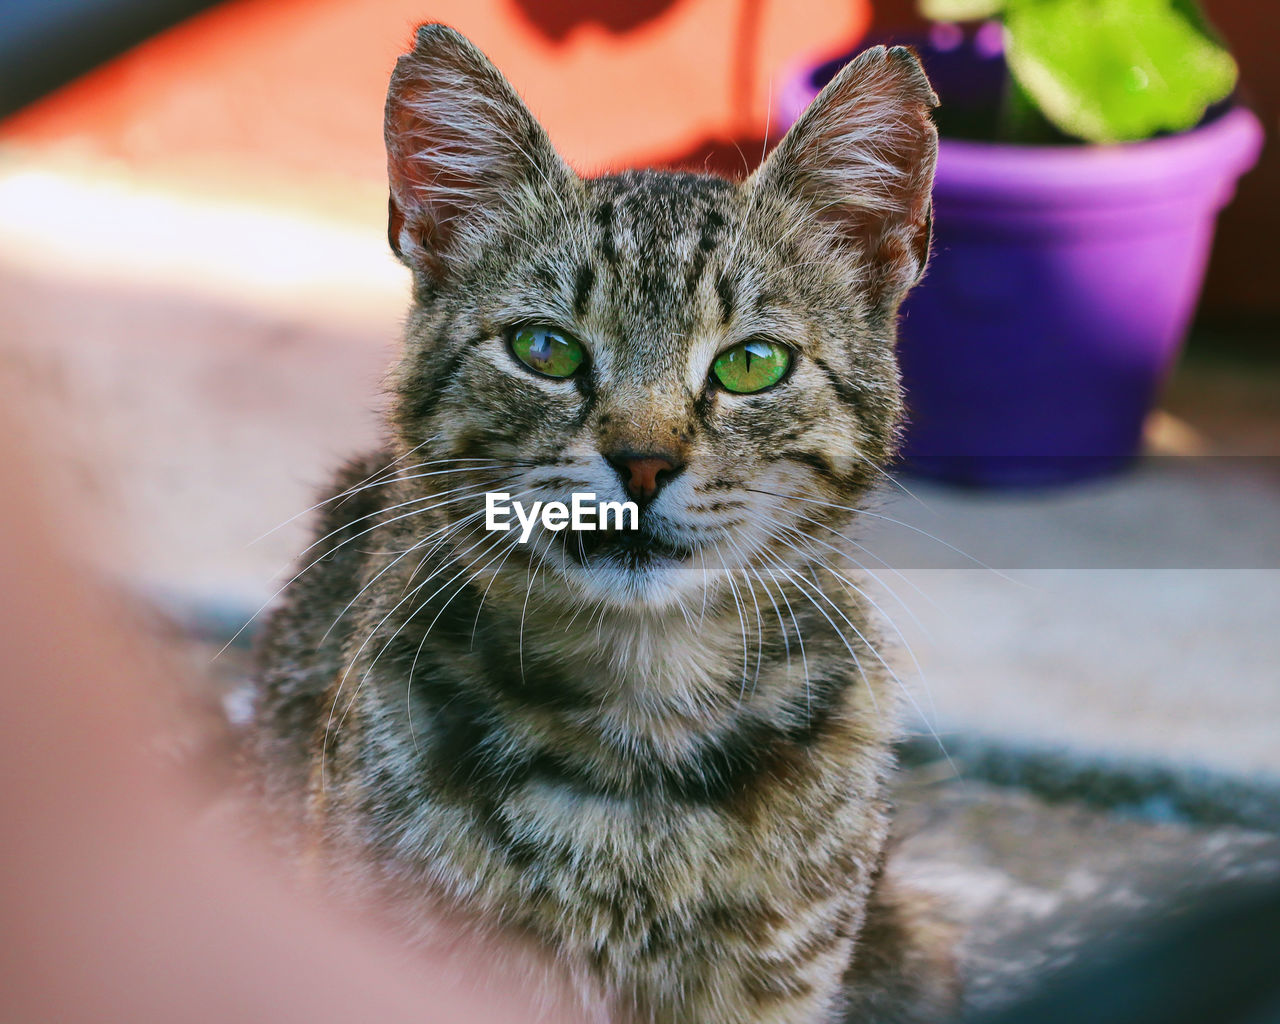 Cute cat with green eyes looking at camer